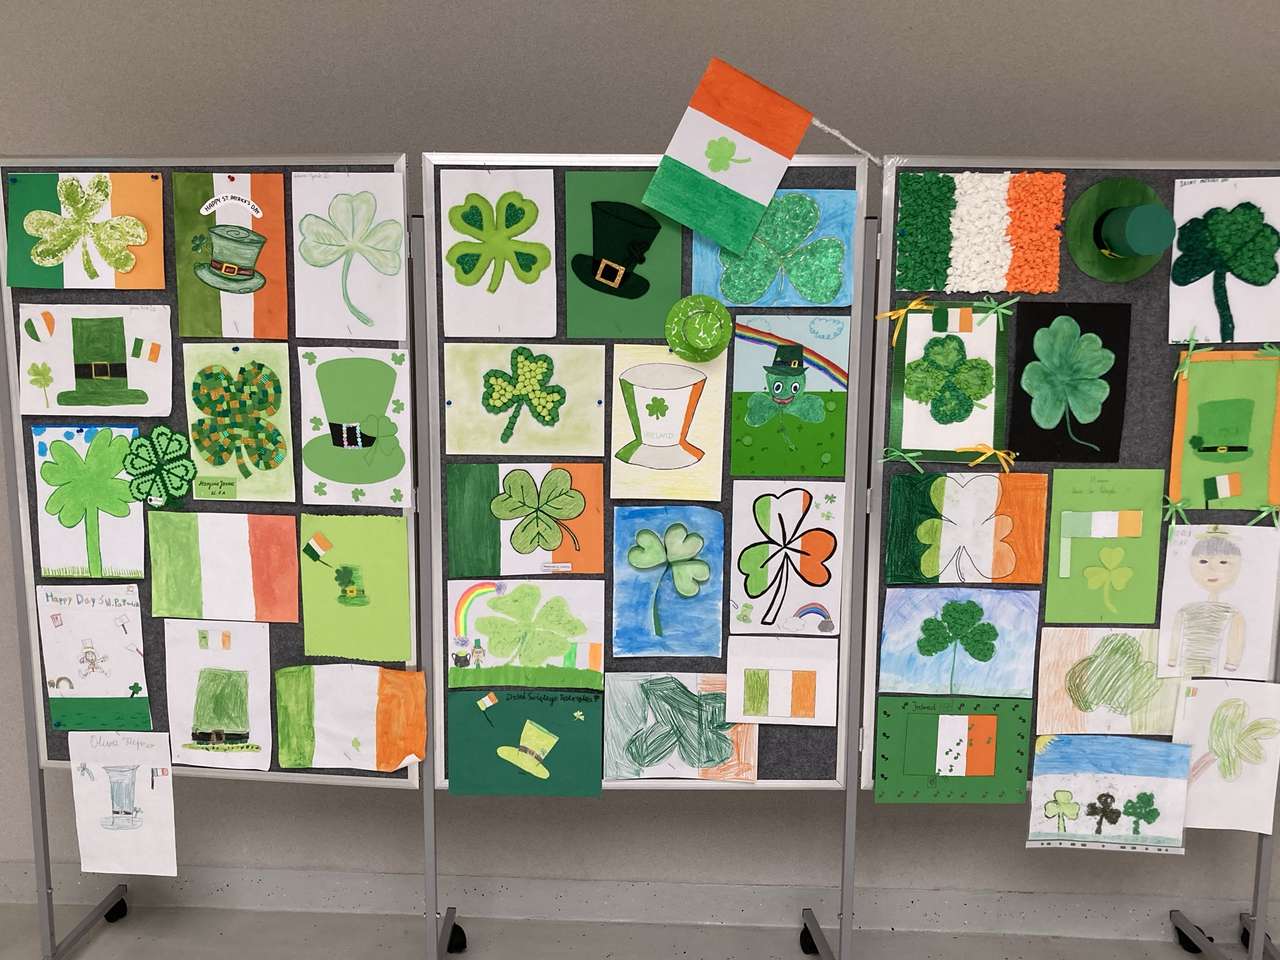 NS. Patrick's Day an unserer Schule Online-Puzzle